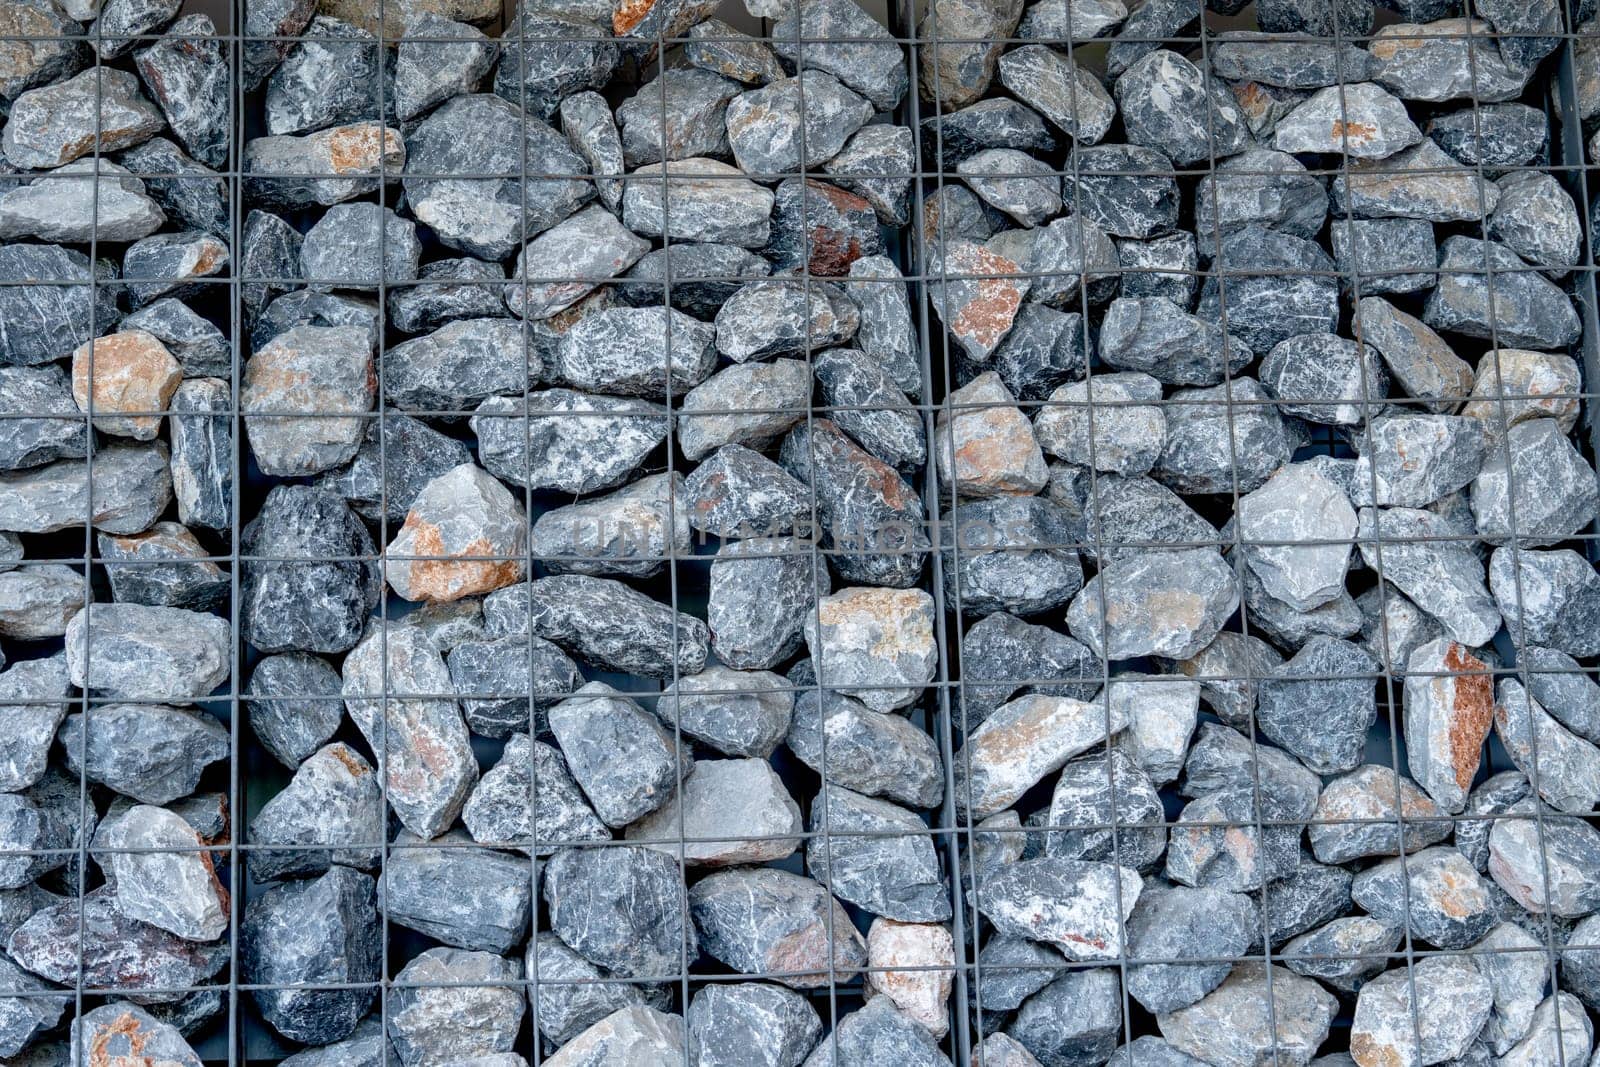 The layer of rock or stone are set up as the wall in some building or factory. by nrradmin